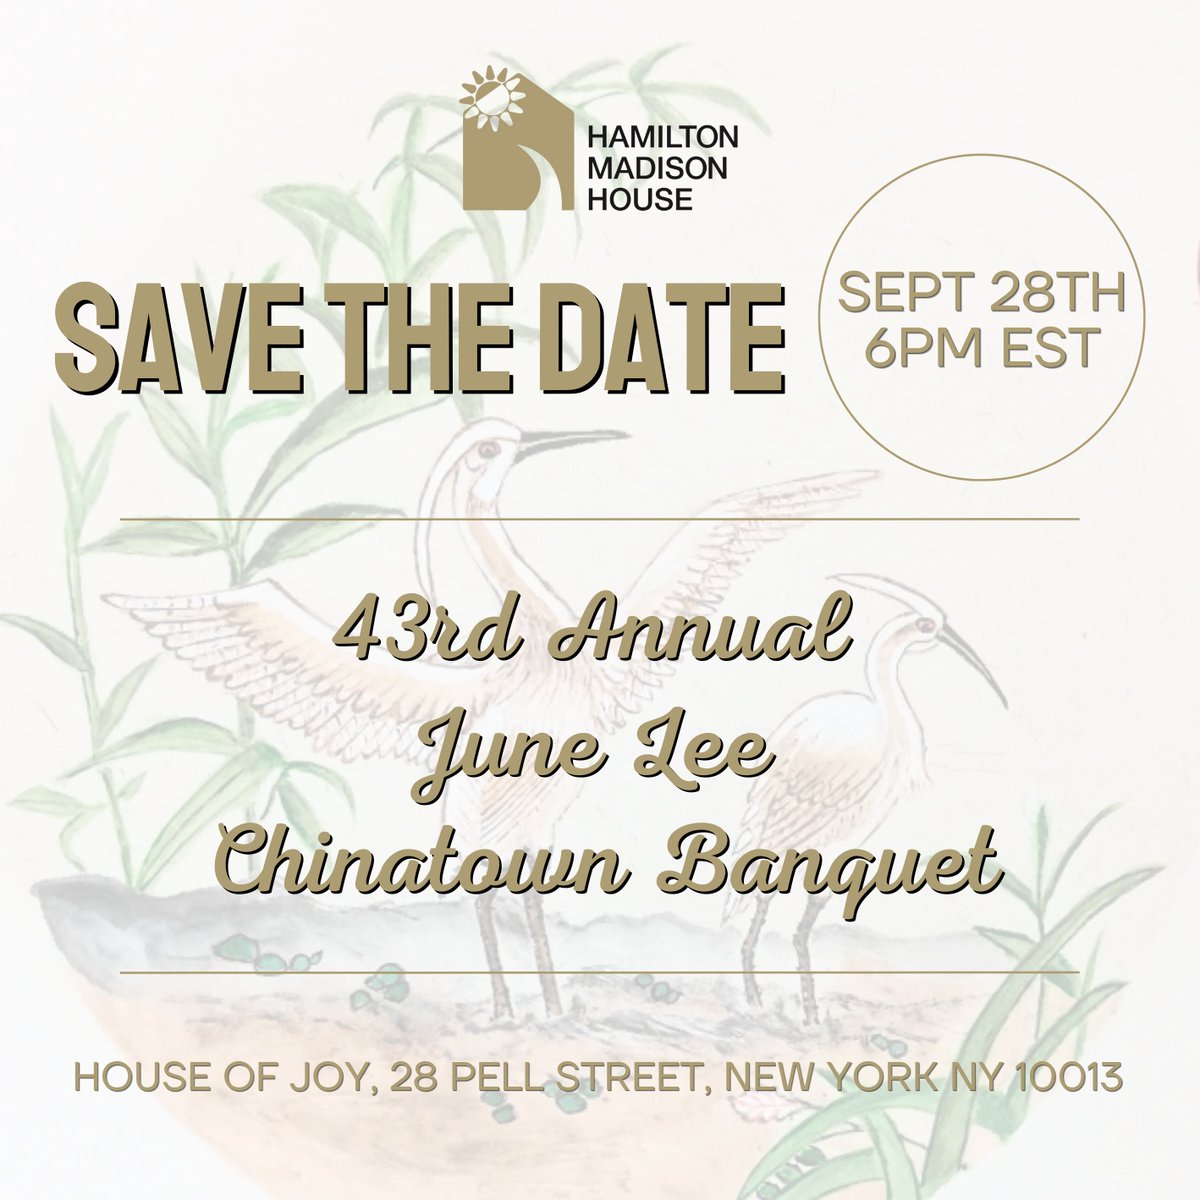 It's almost that time of year again! Save the date for our upcoming 43rd Annual June Lee Chinatown Banquet, taking place on September 28th at 6PM at House of Joy on Pell Street. Stay tuned for more information - tickets will be going live very soon!